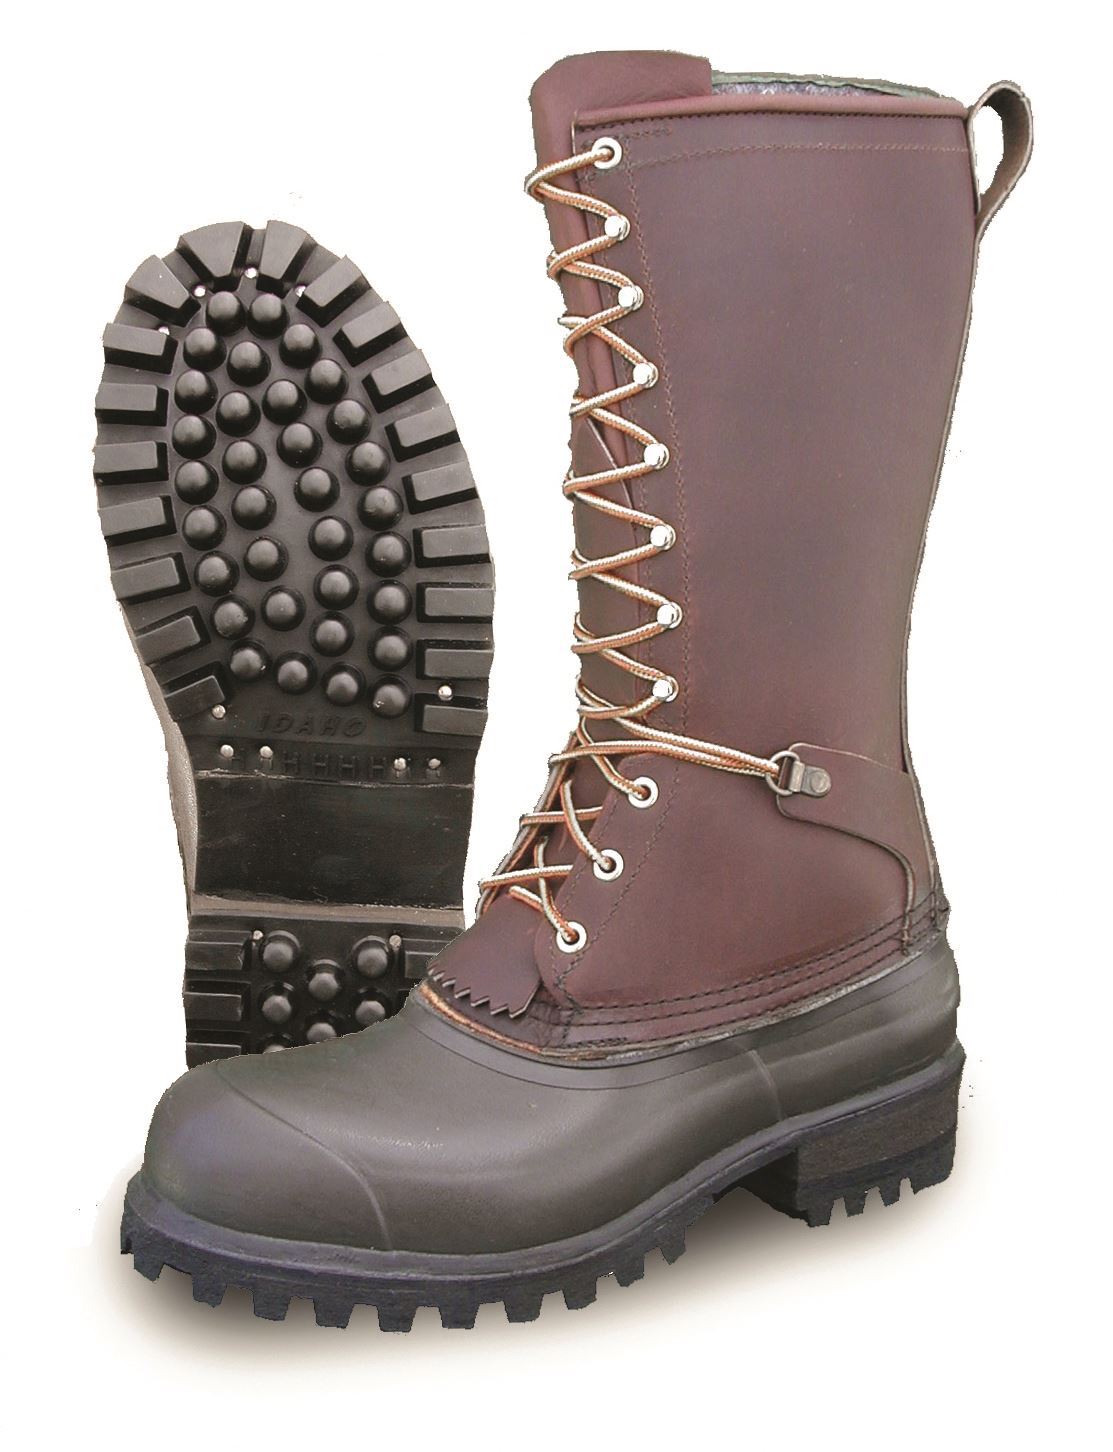 Outdoor/Hunting Pacs Archives - Hoffman Boots